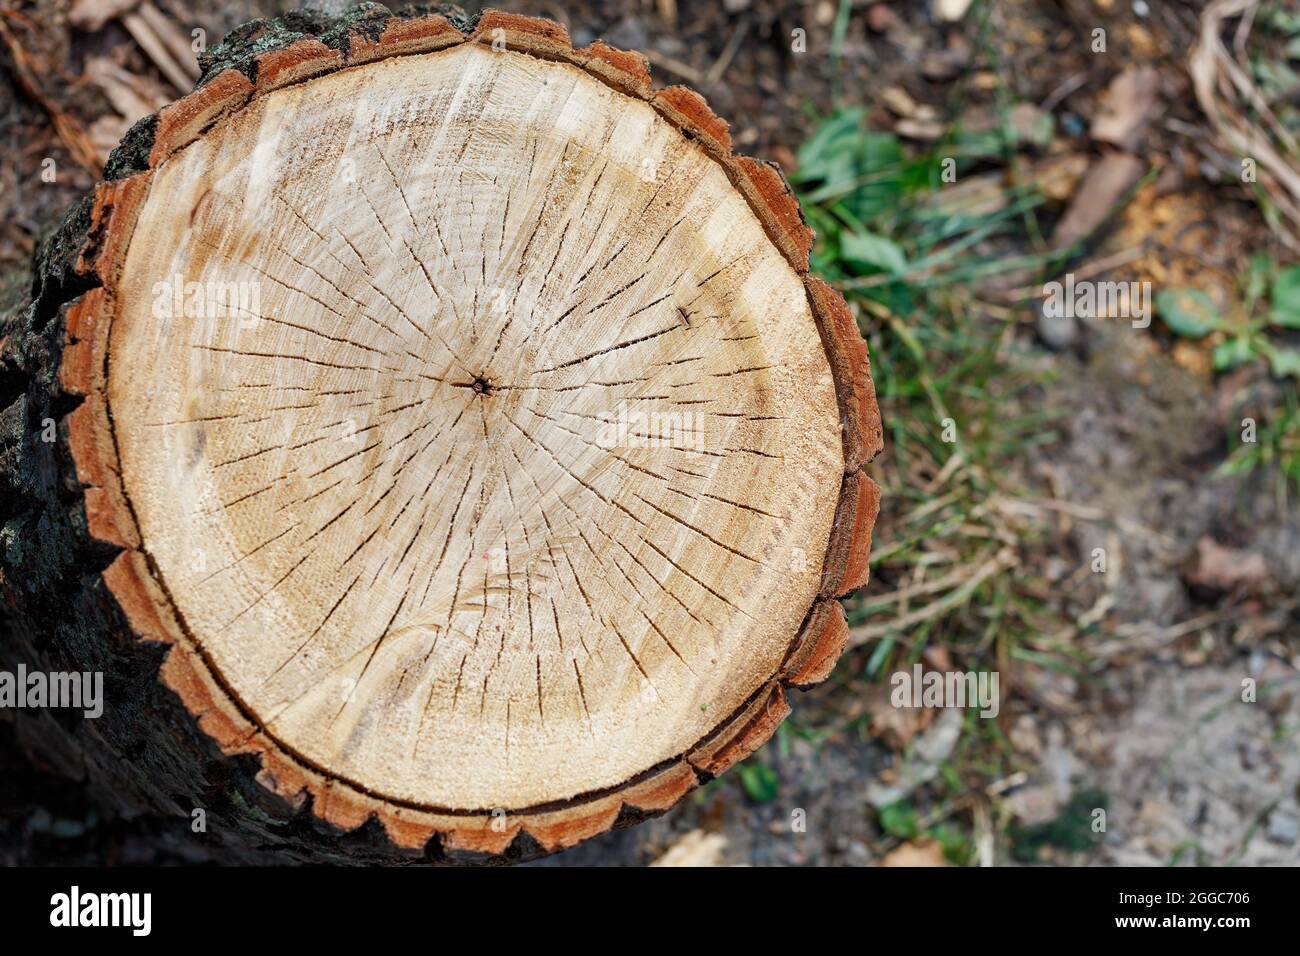 Wooden radial with cracks even cut in section with annual rings and bark around the circumference in a summer garden. Copy space. Stock Photo